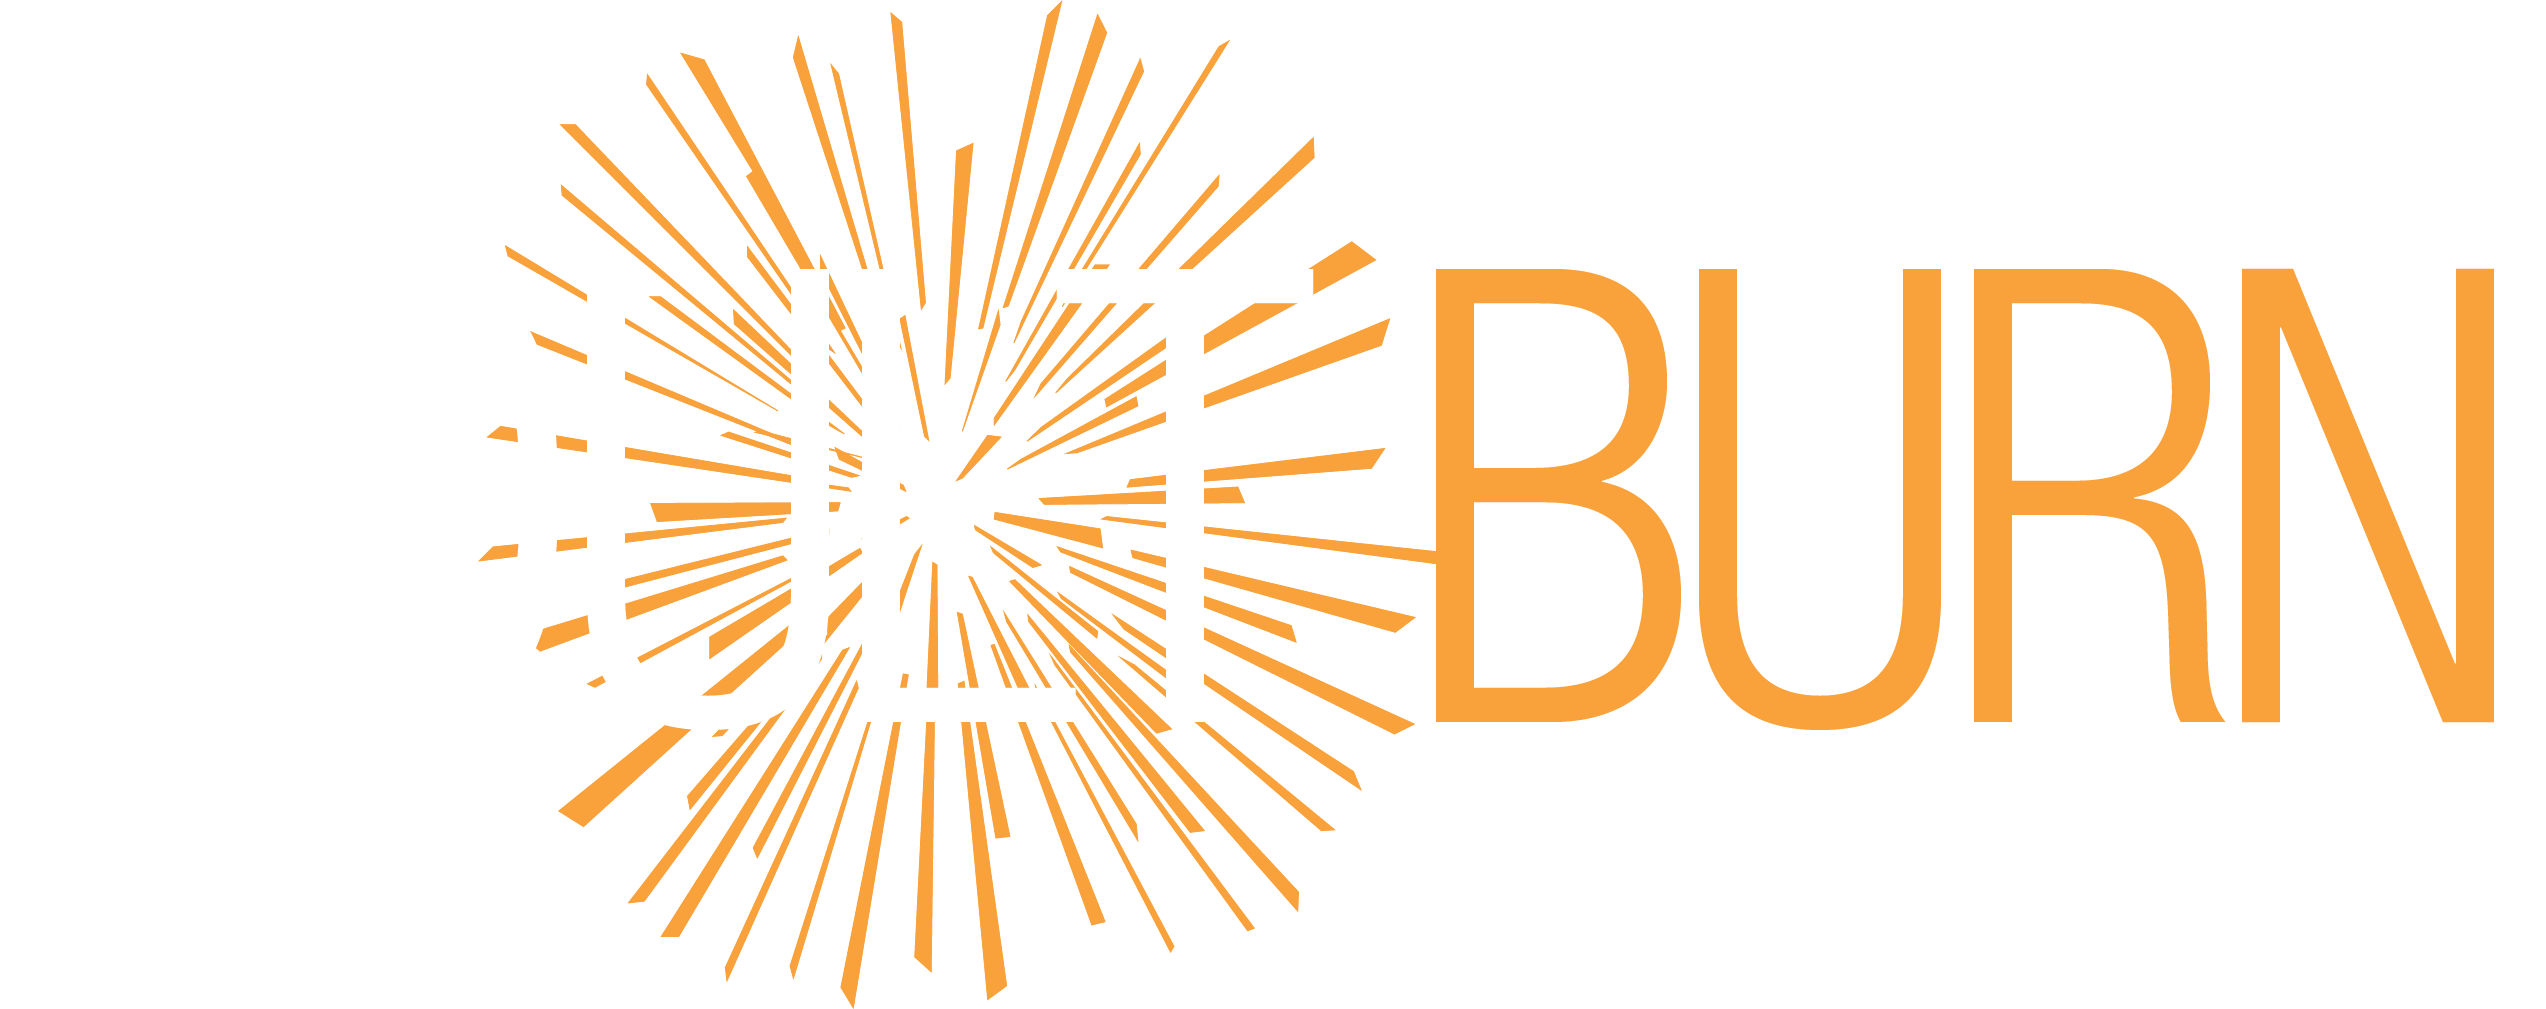 Burn Logo - Adult Burn Support UK – Information, support and advice about burns ...